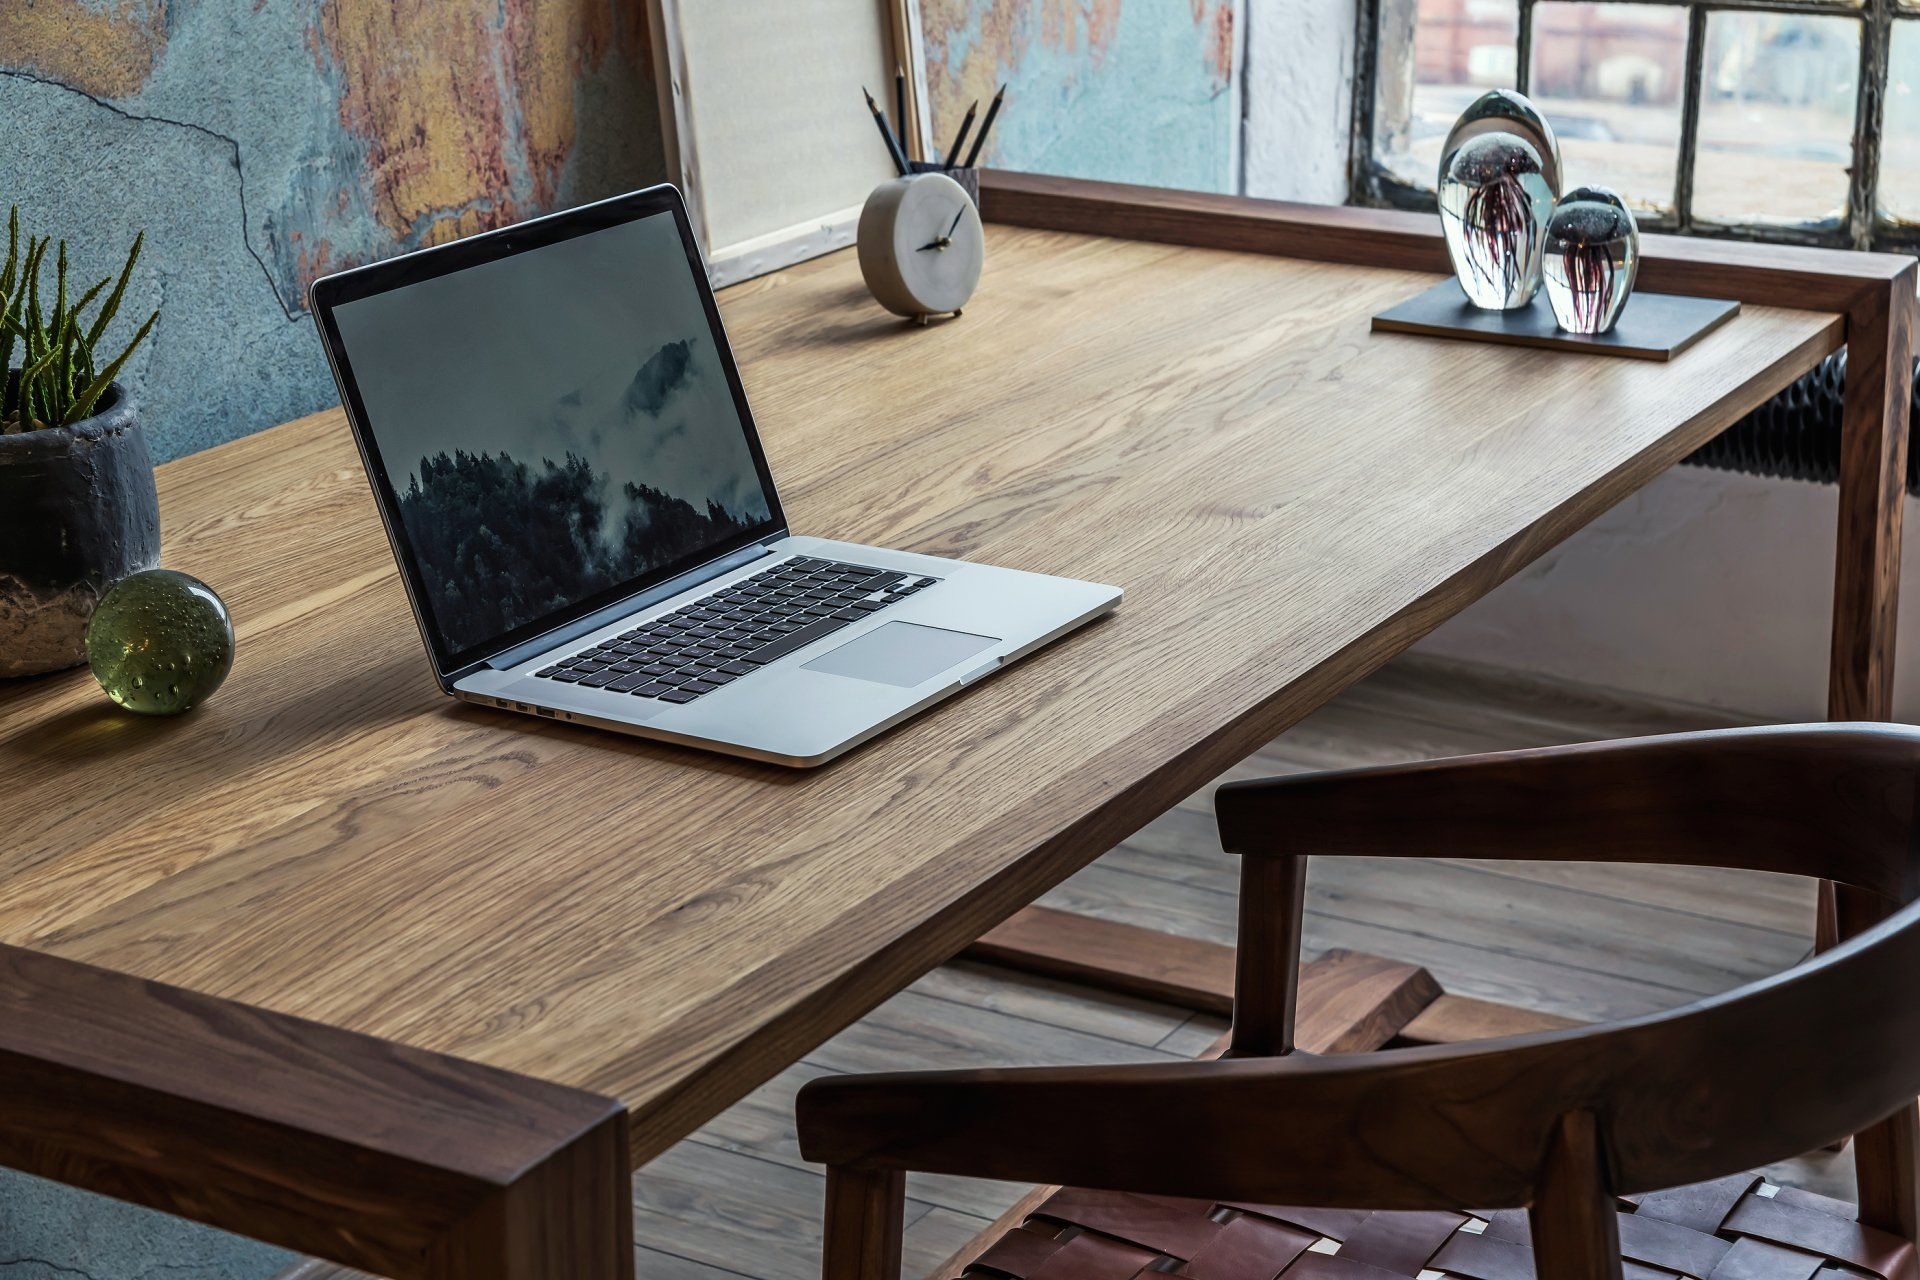 Hardwood table, leather and wood chair, laptop and decorative elements on the surface